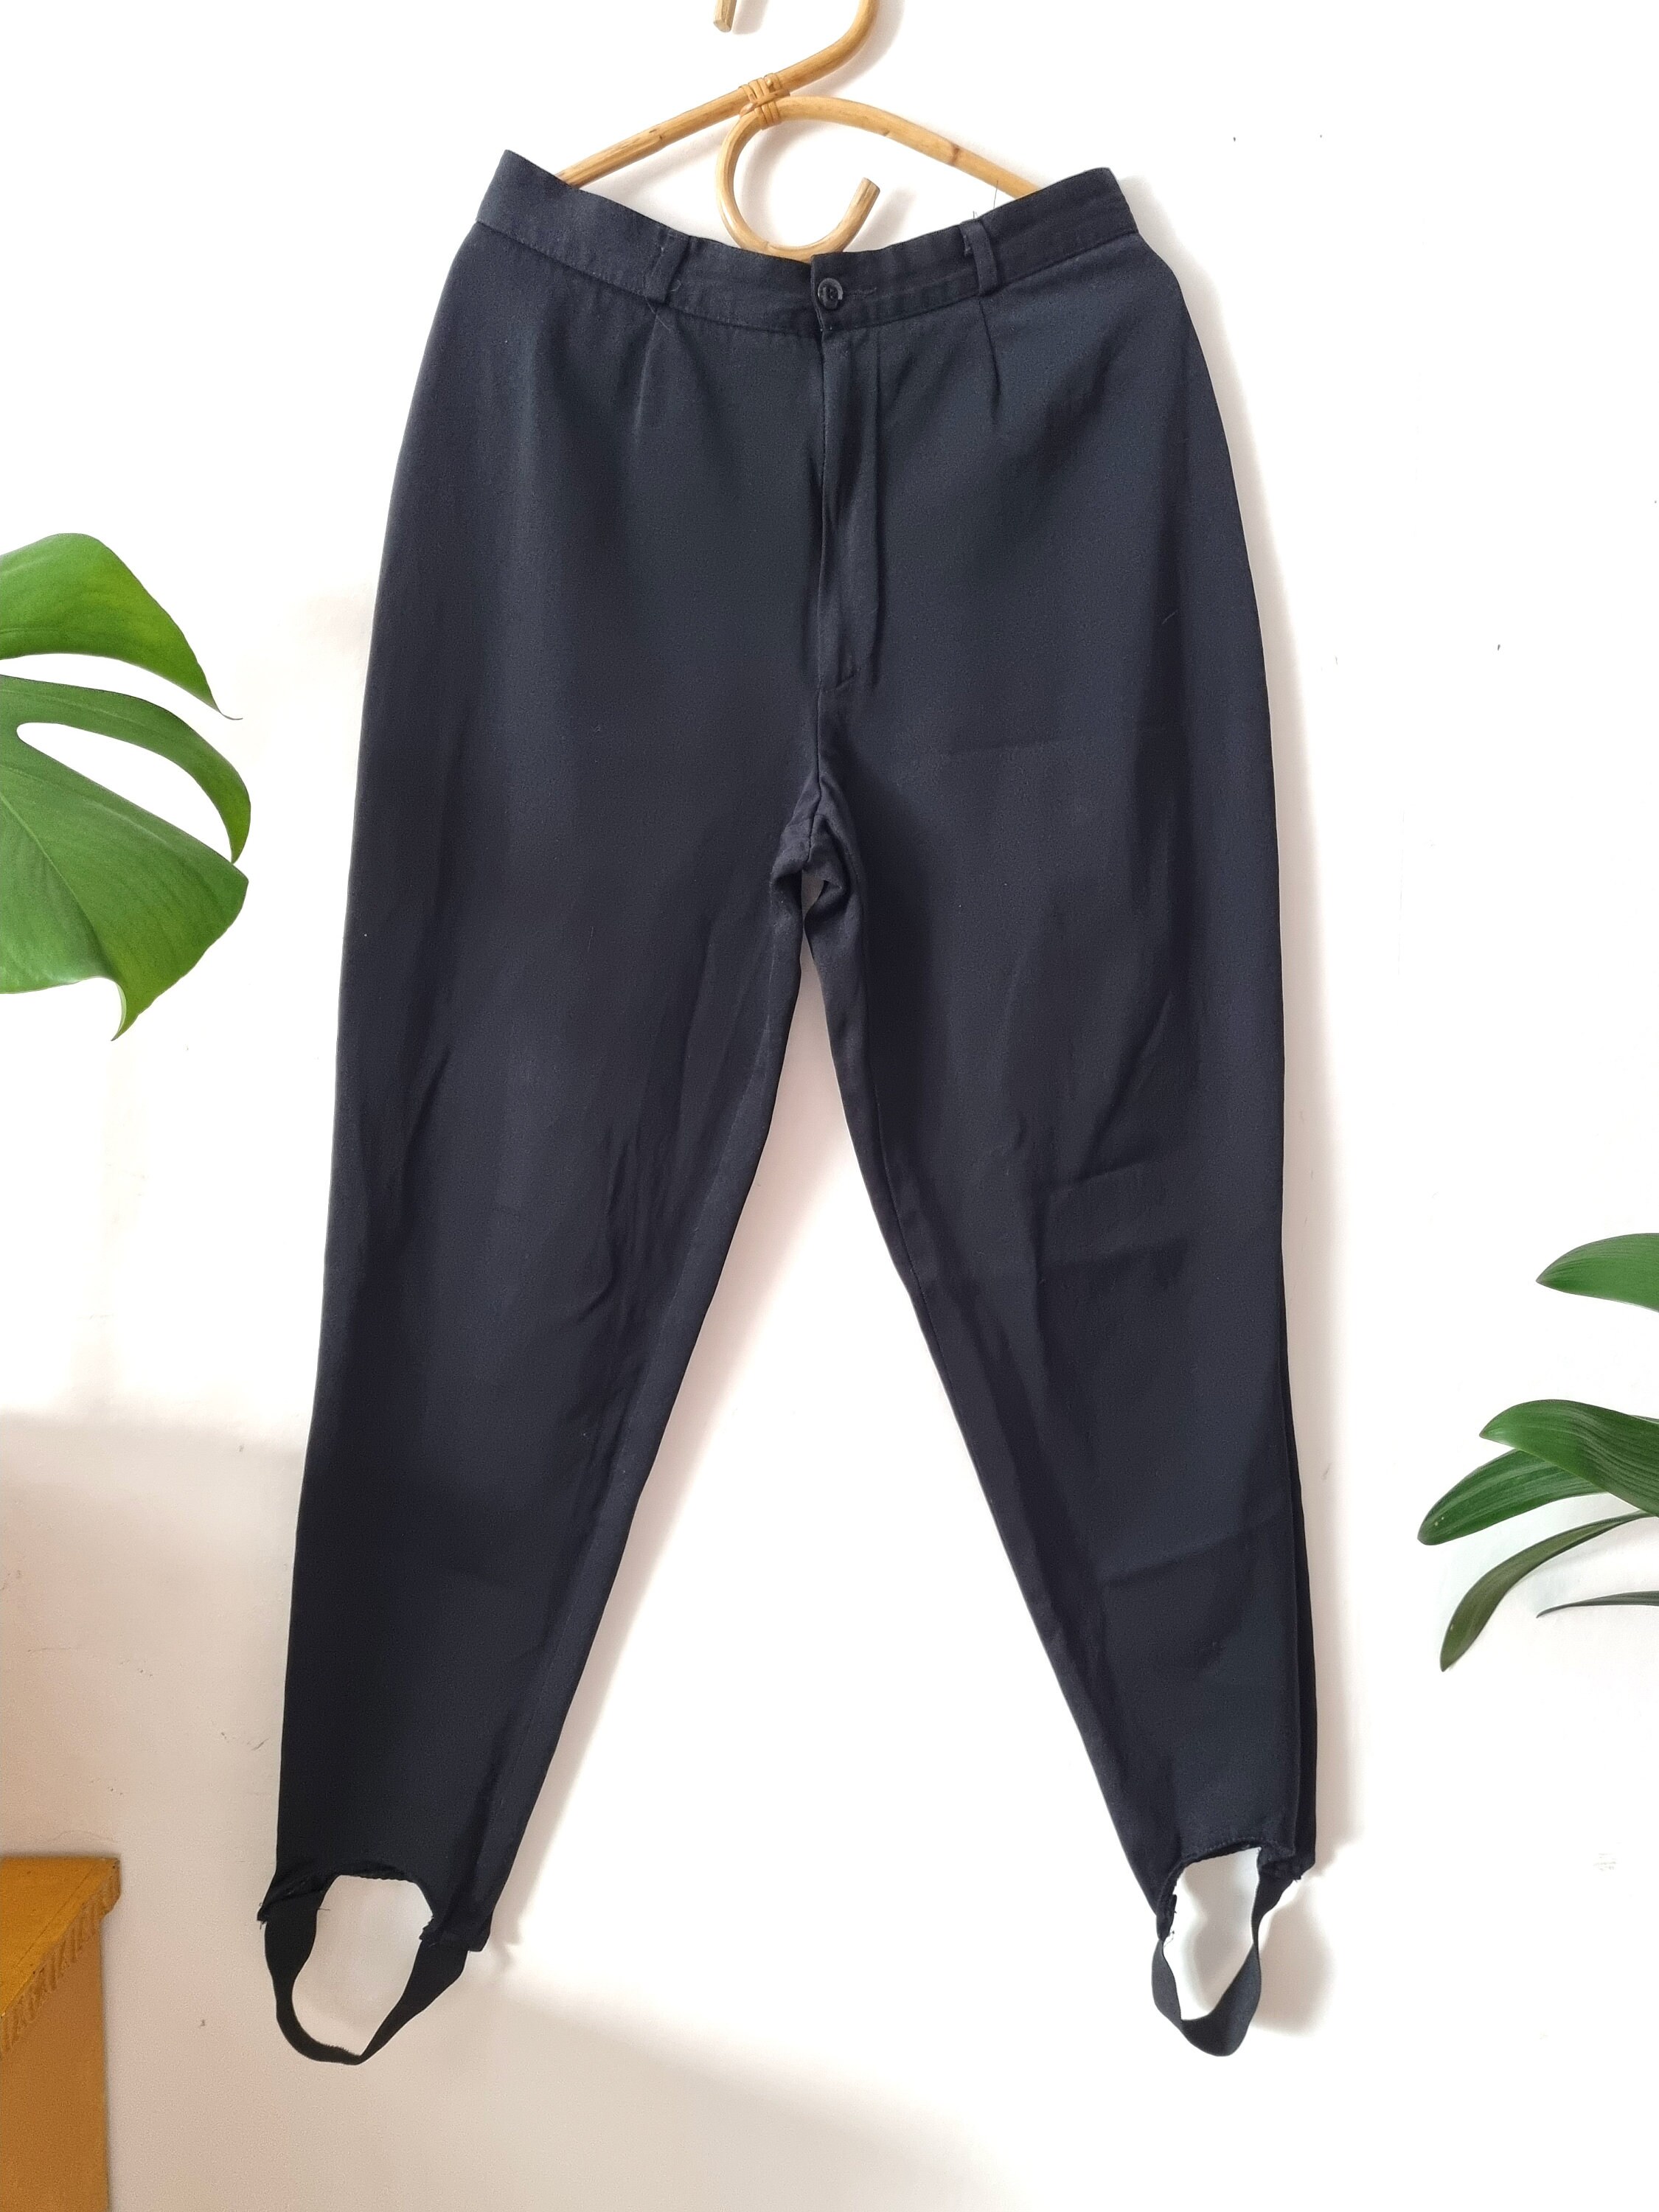 Threadbare Trousers and Pants  Buy Threadbare Stone Straight Leg Belted  Cargo Trousers Online  Nykaa Fashion